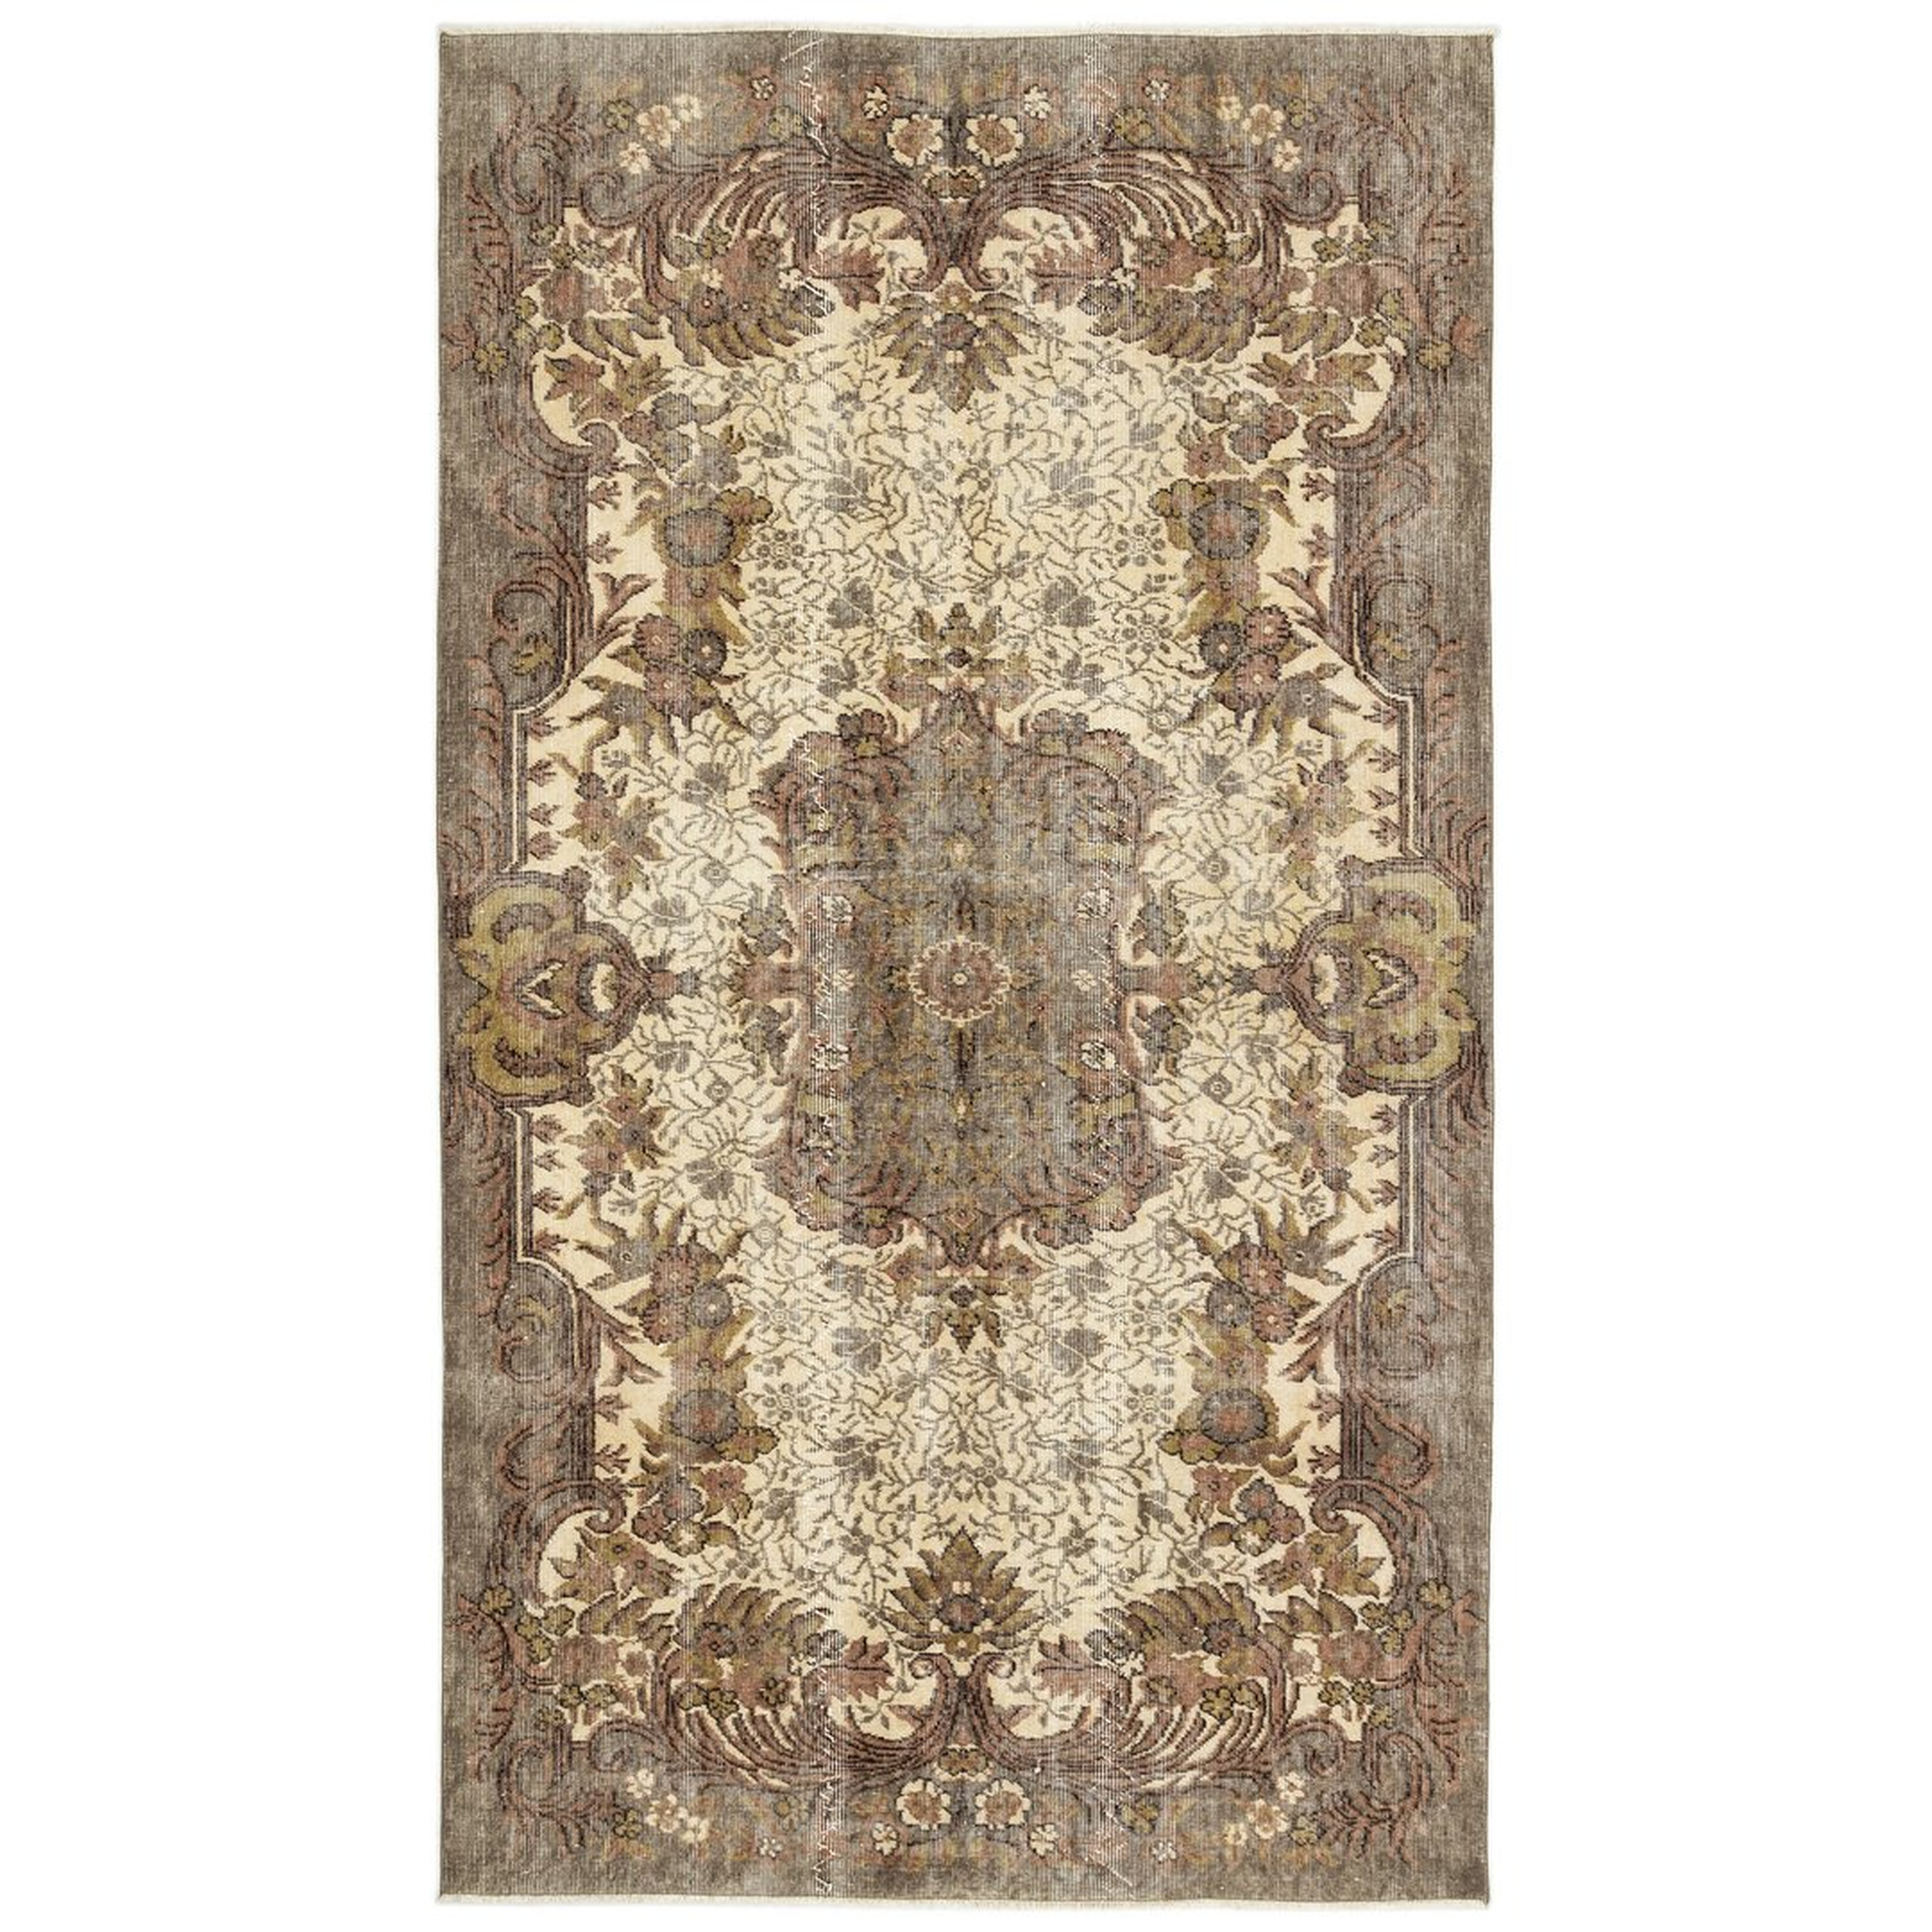 "Bespoky Vintage Rugs One-of-a-Kind Hand-Knotted 1960s Beige/Brown 5'2"" x 8'2"" Area Rug" - Perigold